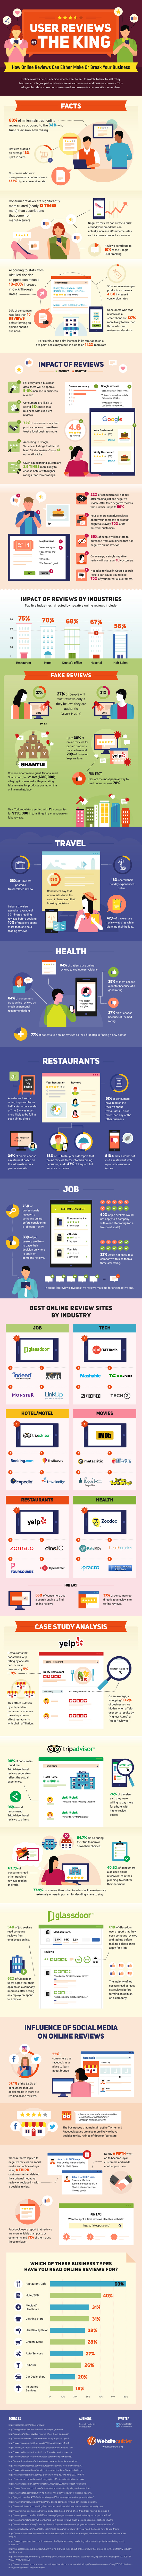 Online Reviews Can Make or Break Your Business